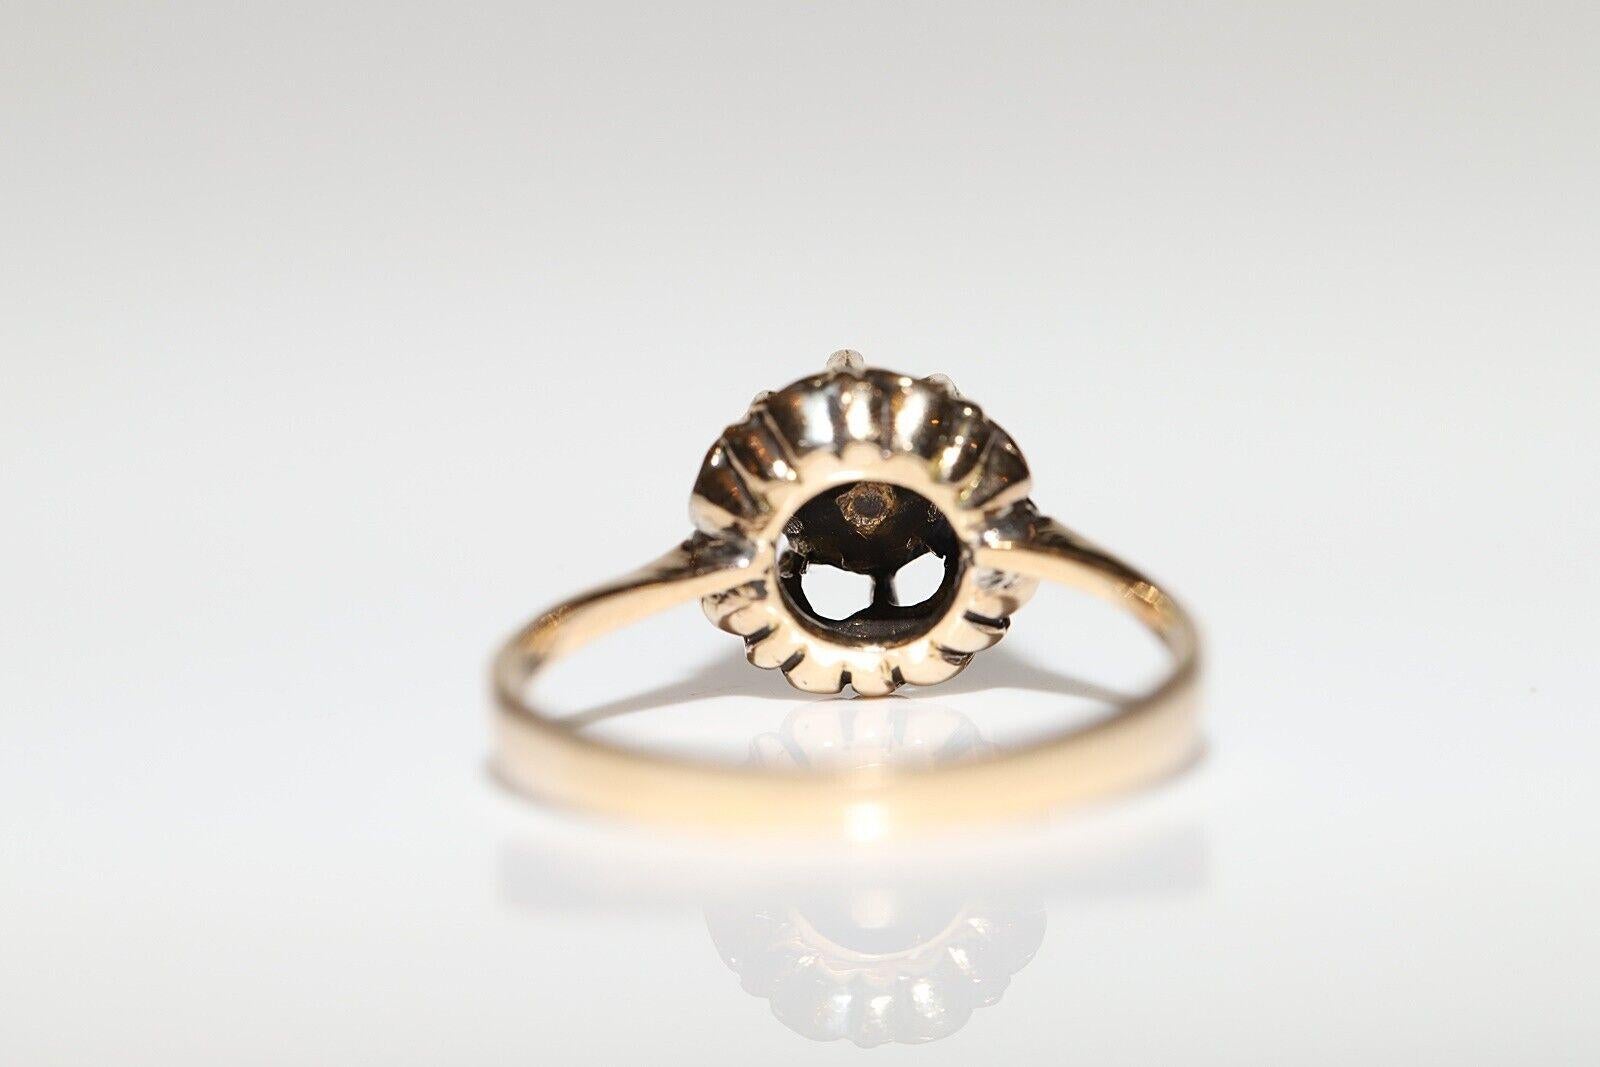  Vintage Circa 1960s 9k Gold Natural Rose Cut Diamond Solitaire Ring In Good Condition For Sale In Fatih/İstanbul, 34